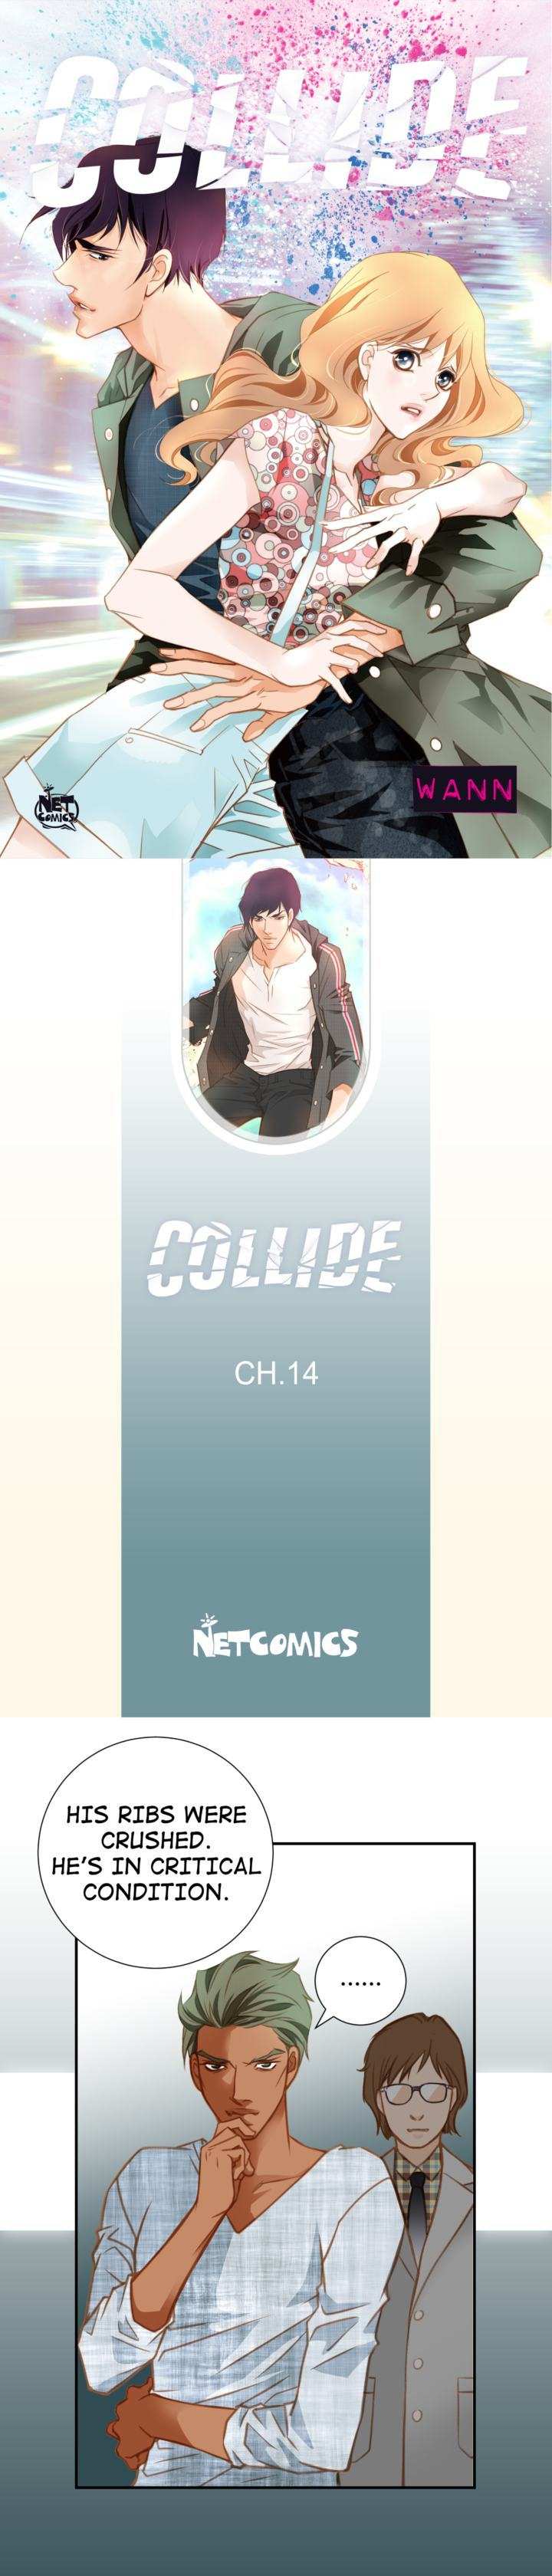 Collide Chapter 14 - page 1